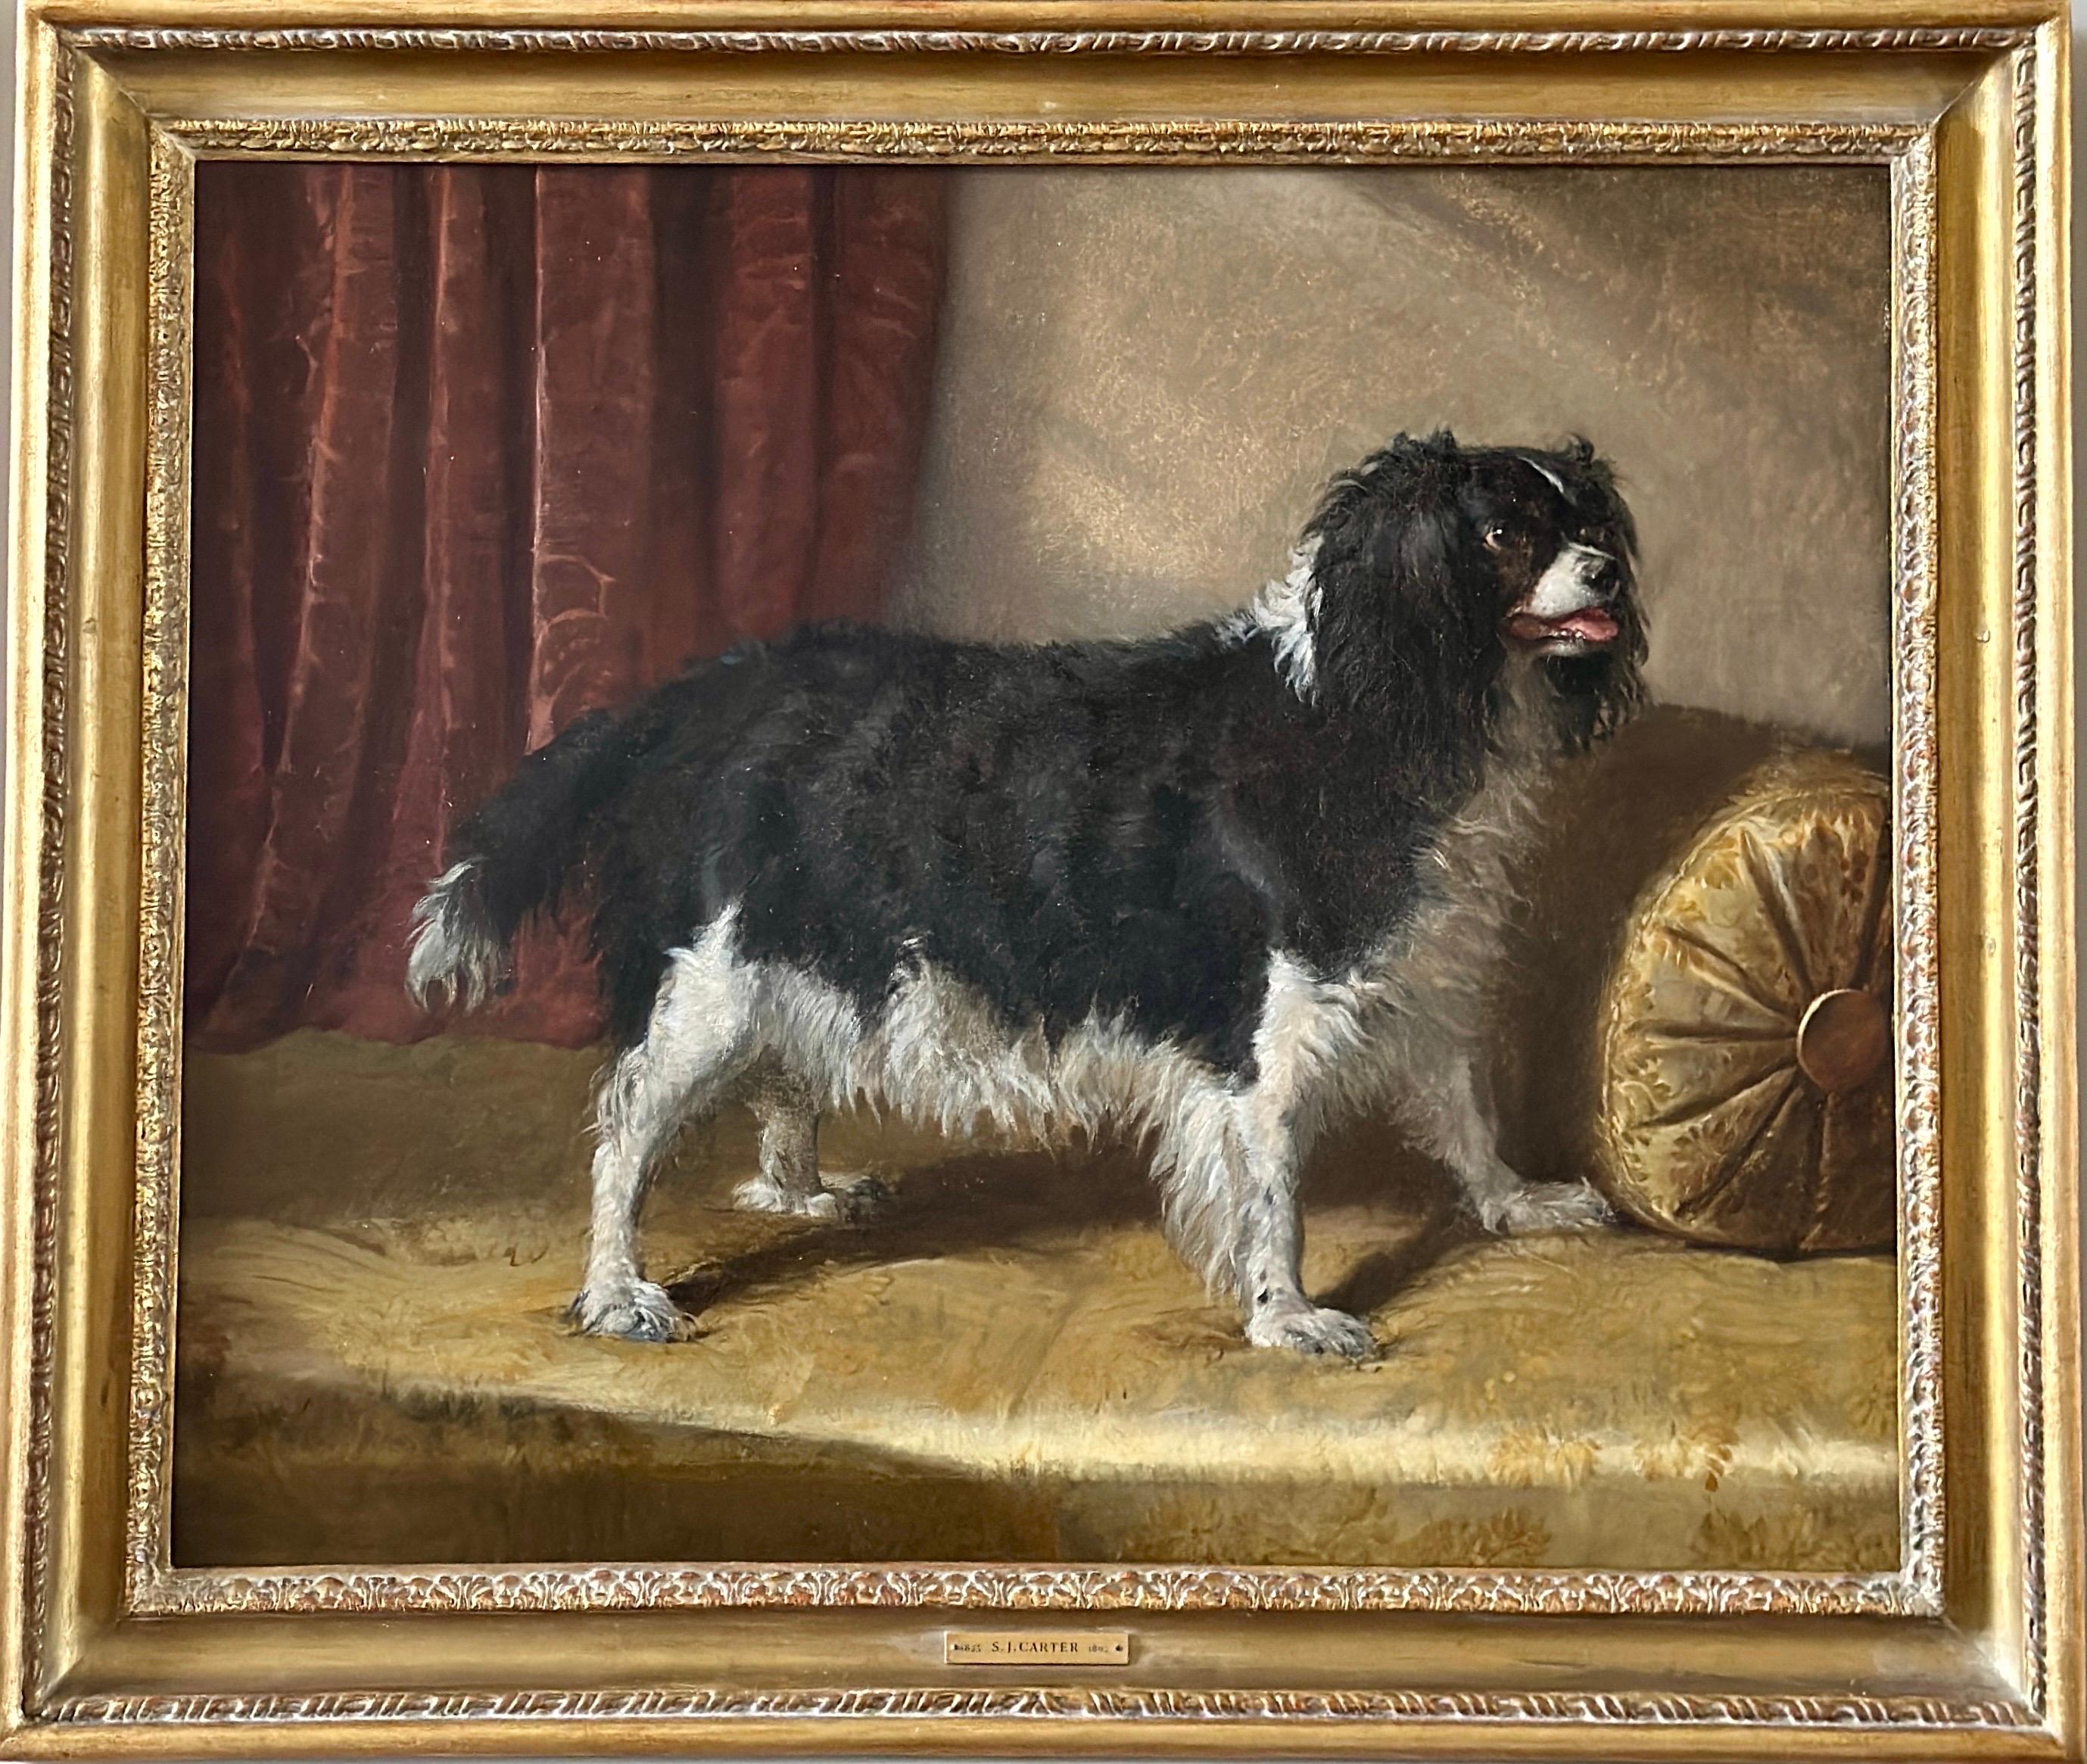 Samuel John Carter Animal Painting - A portrait of a black and white spaniel dog in a sumptuous interior